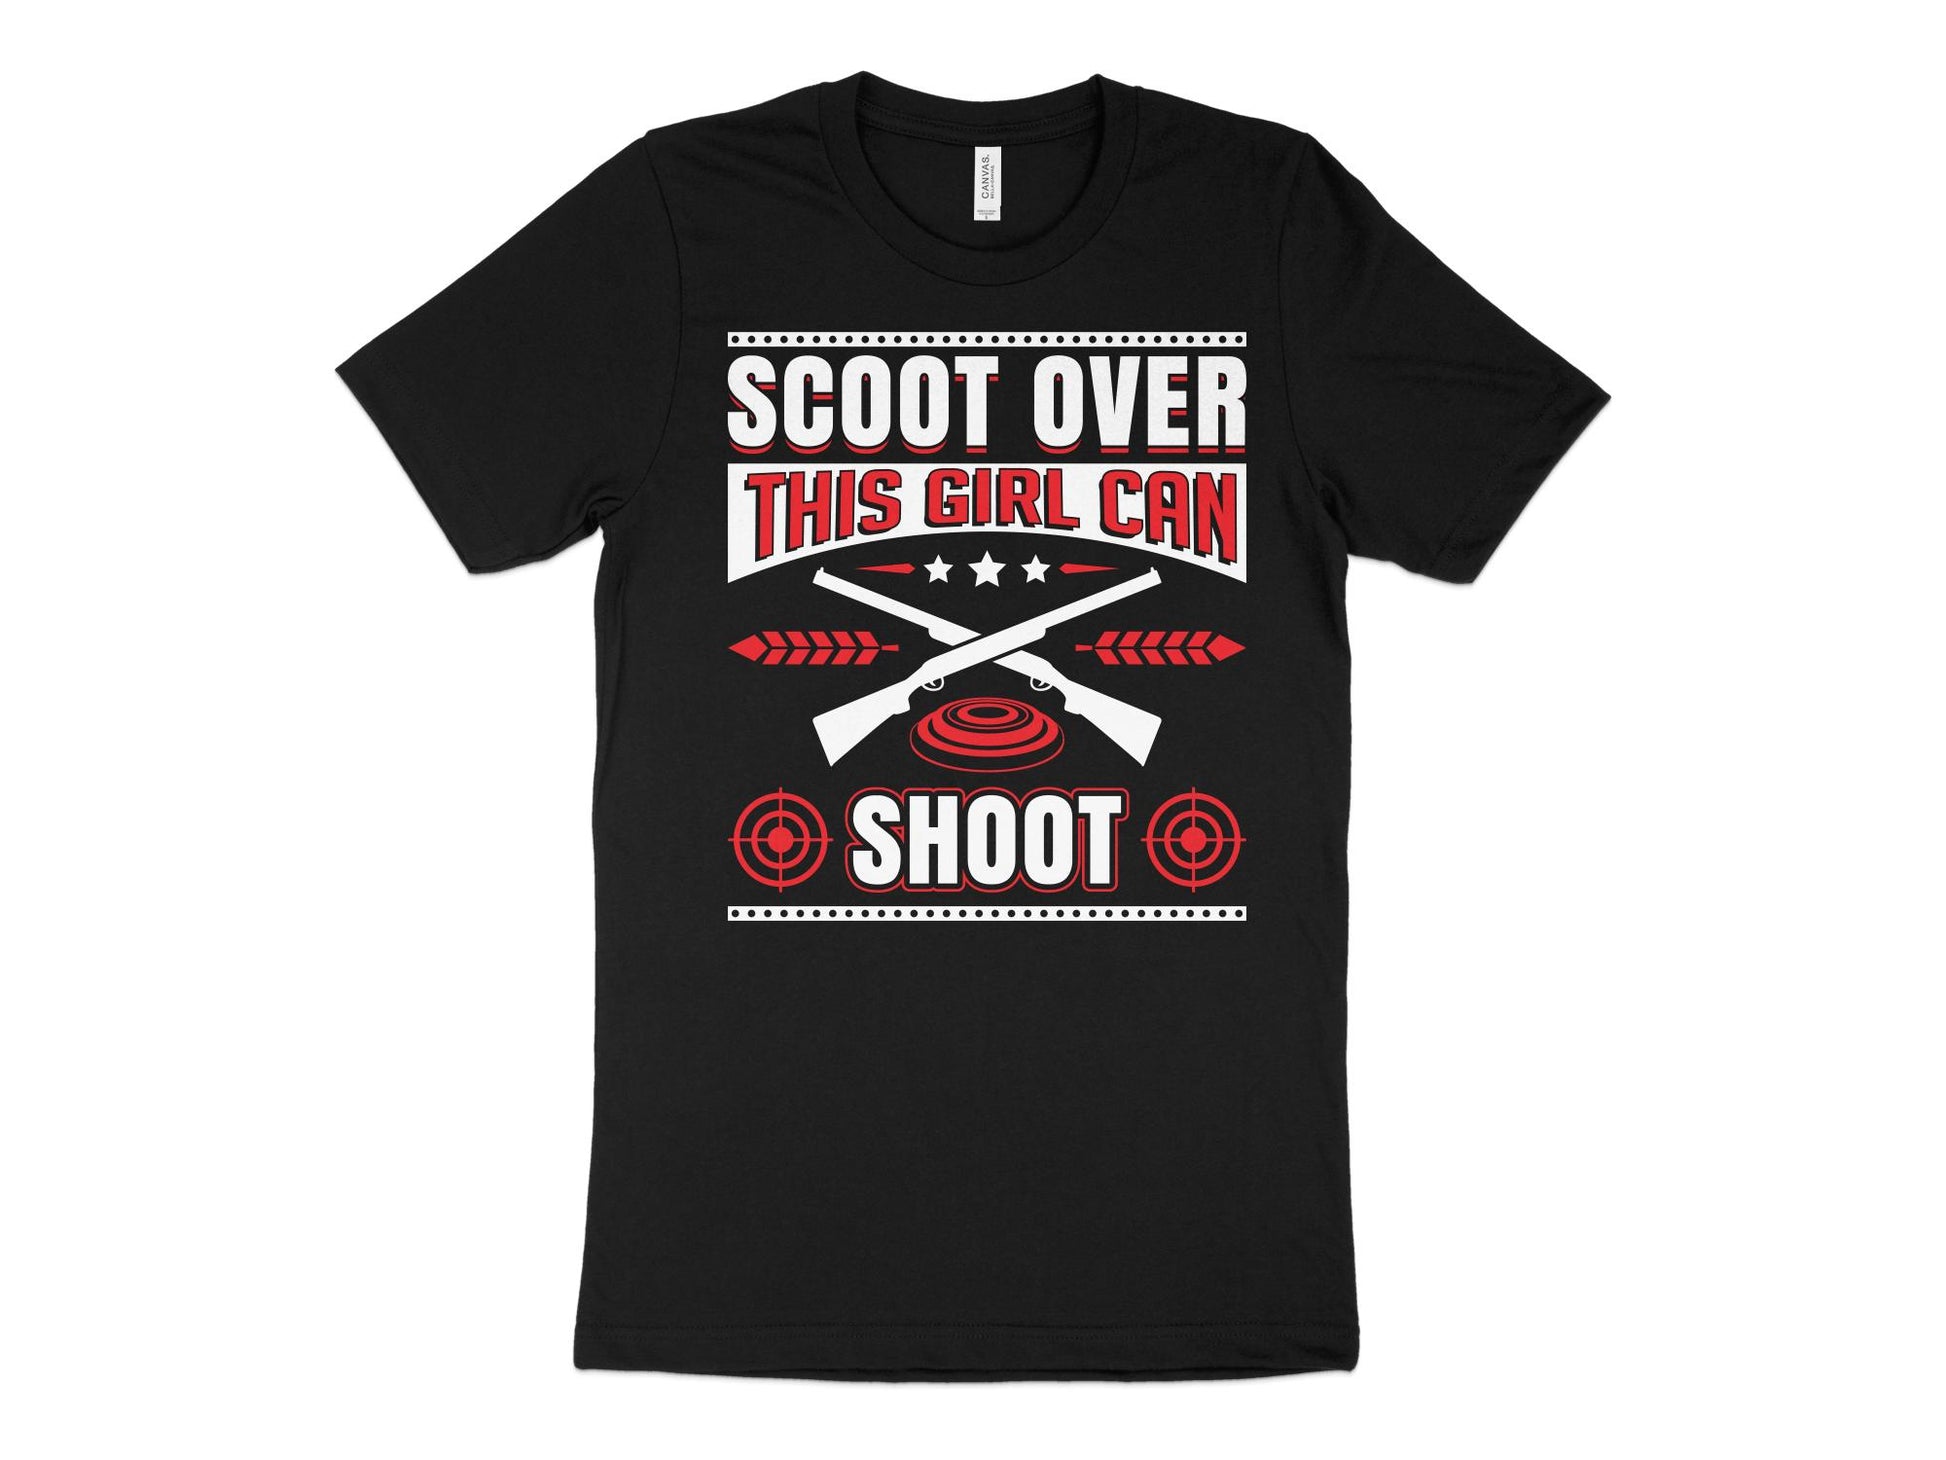 Trap Shooting Shirt - Scoot Over This Girl Can Shoot, black